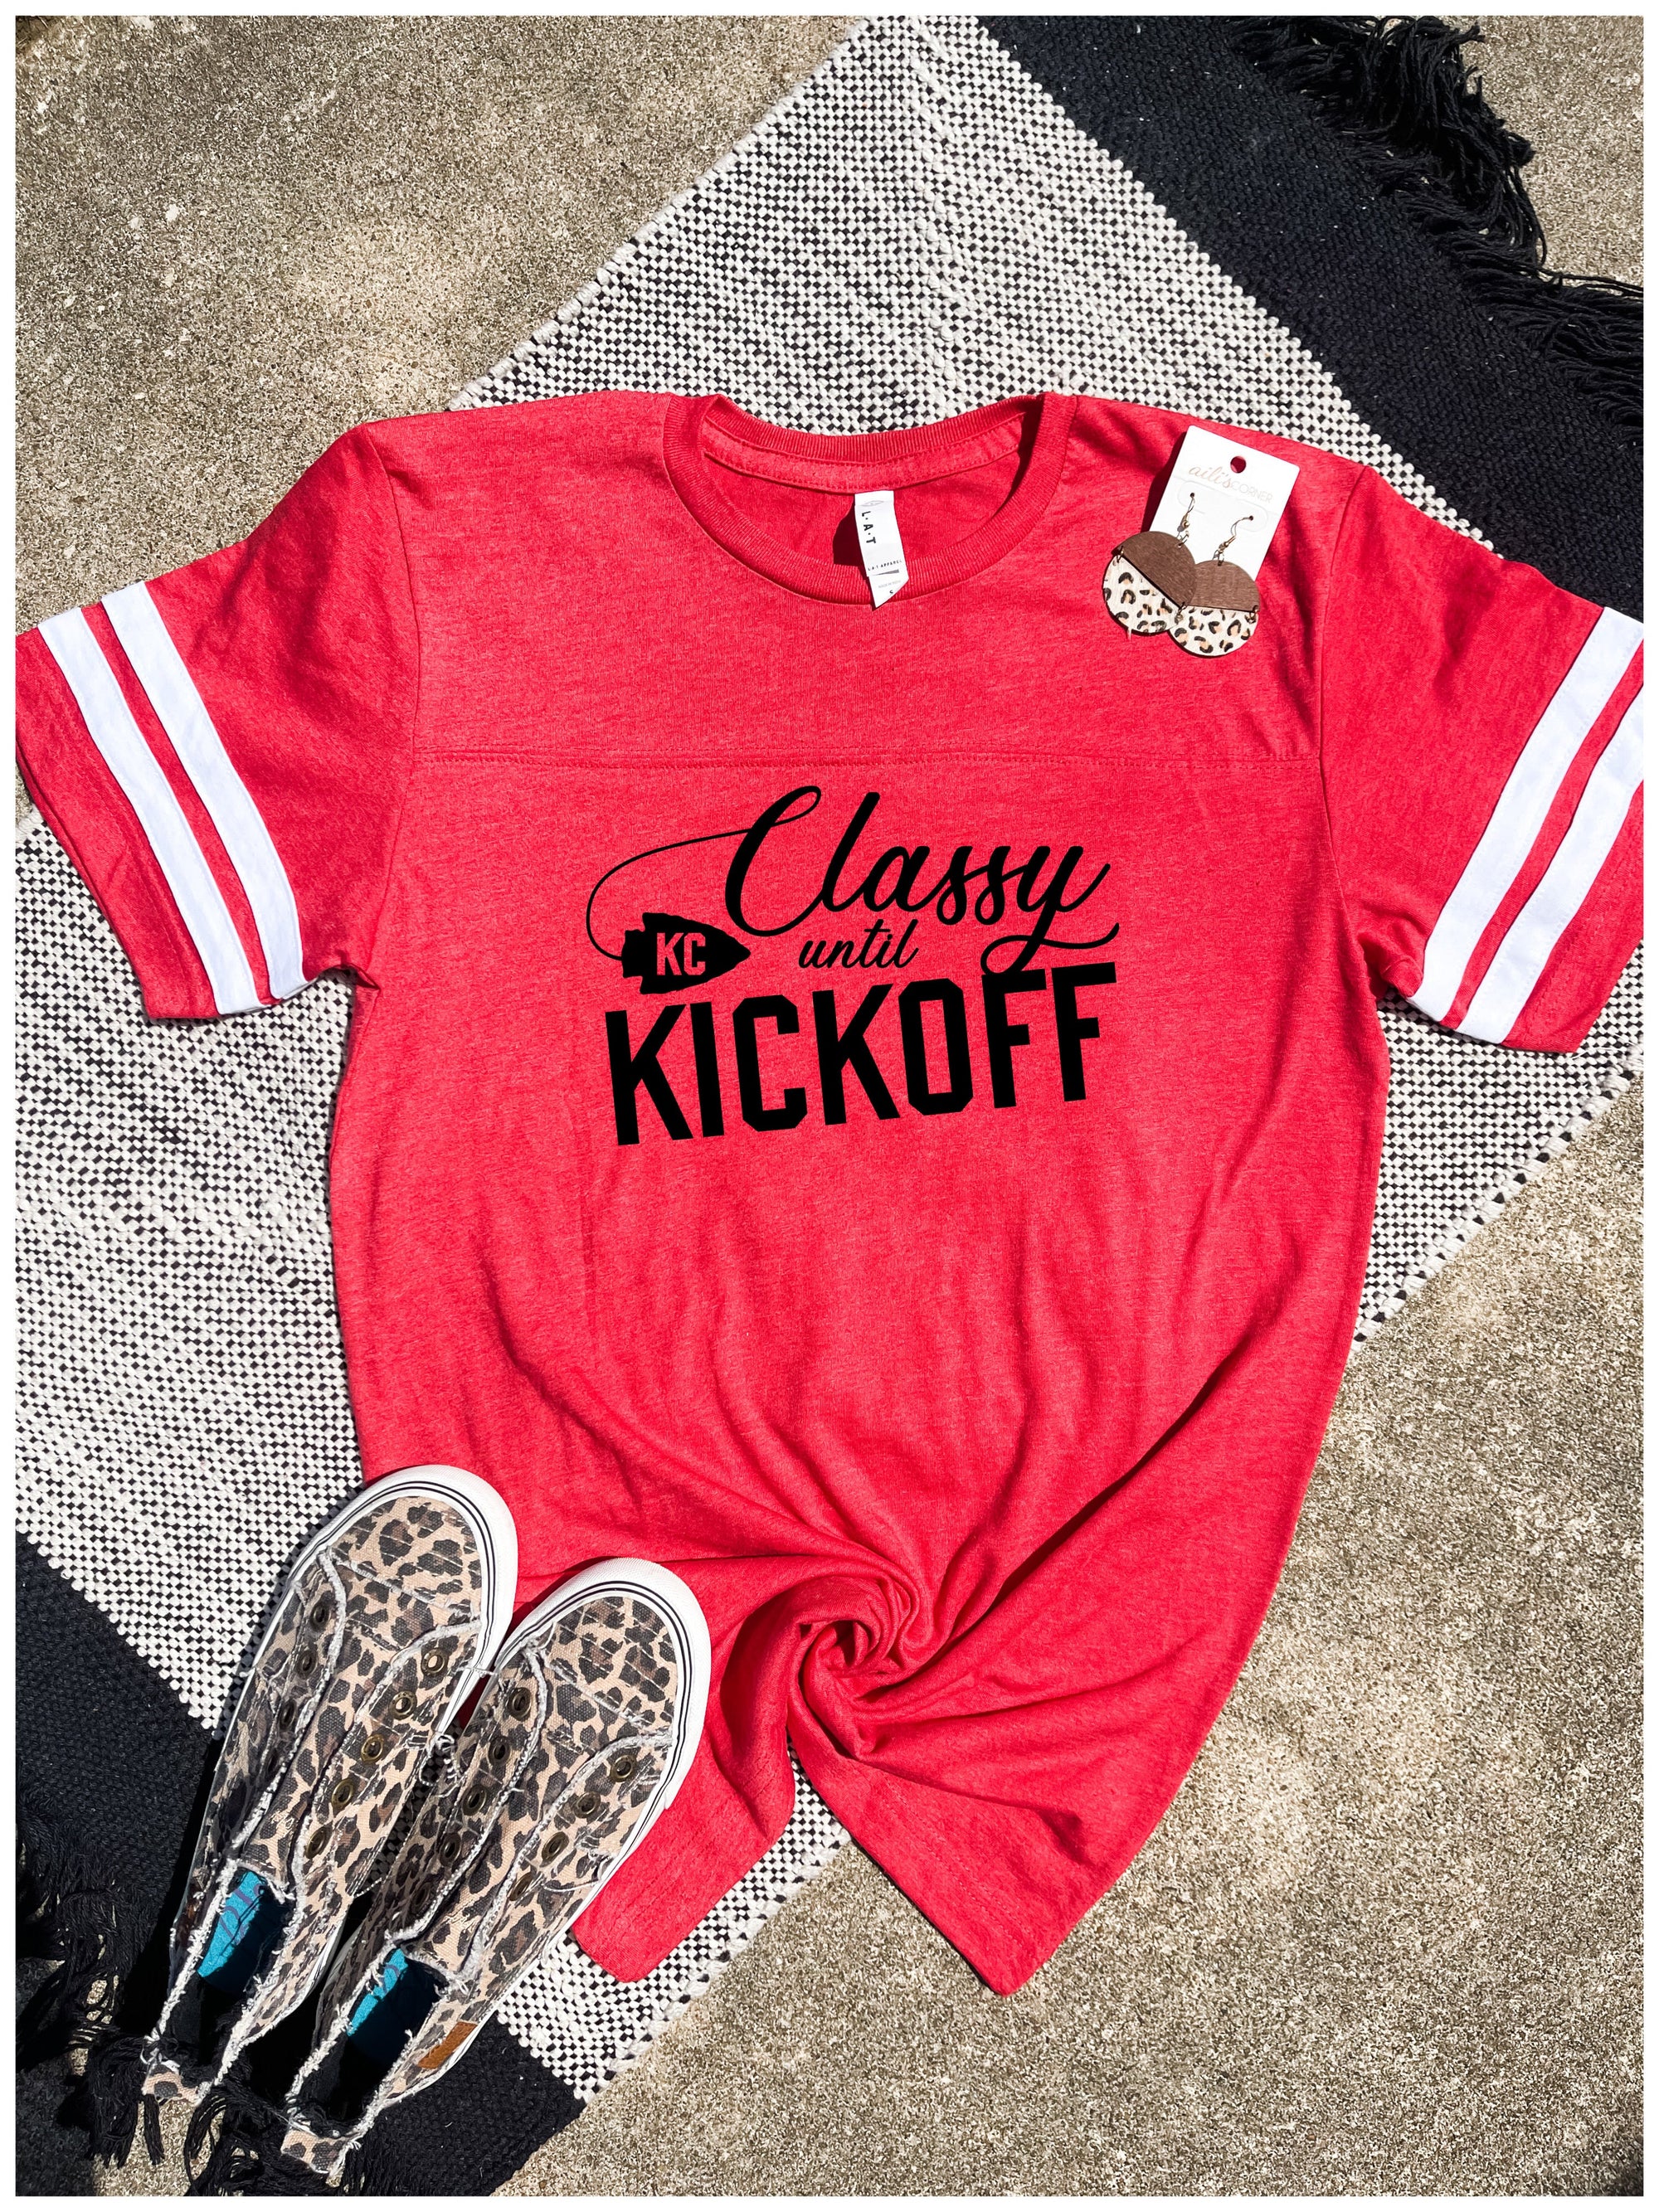 **HALFTIME DEAL** Classy Until KC Kickoff Red Striped Sleeve Tee